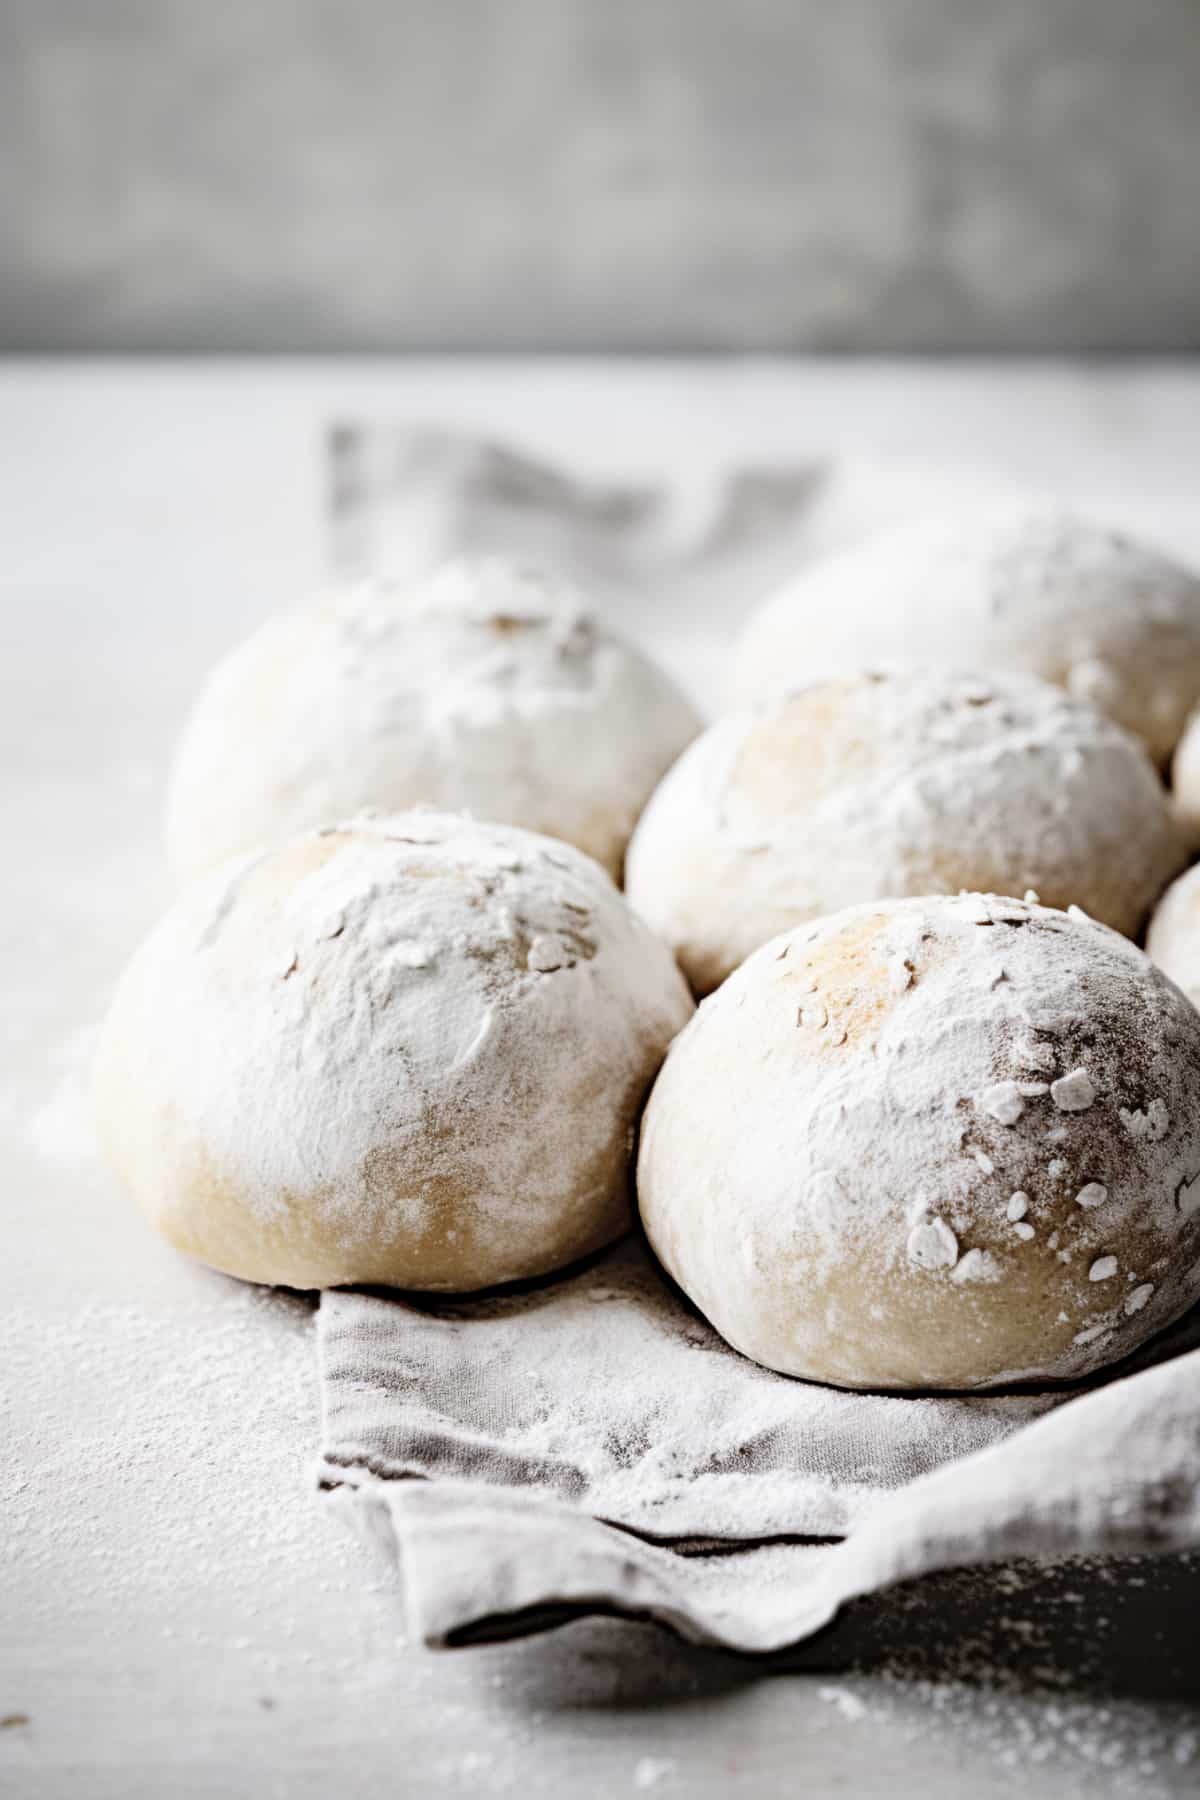 Unbaked bread rolls on a floured surface.